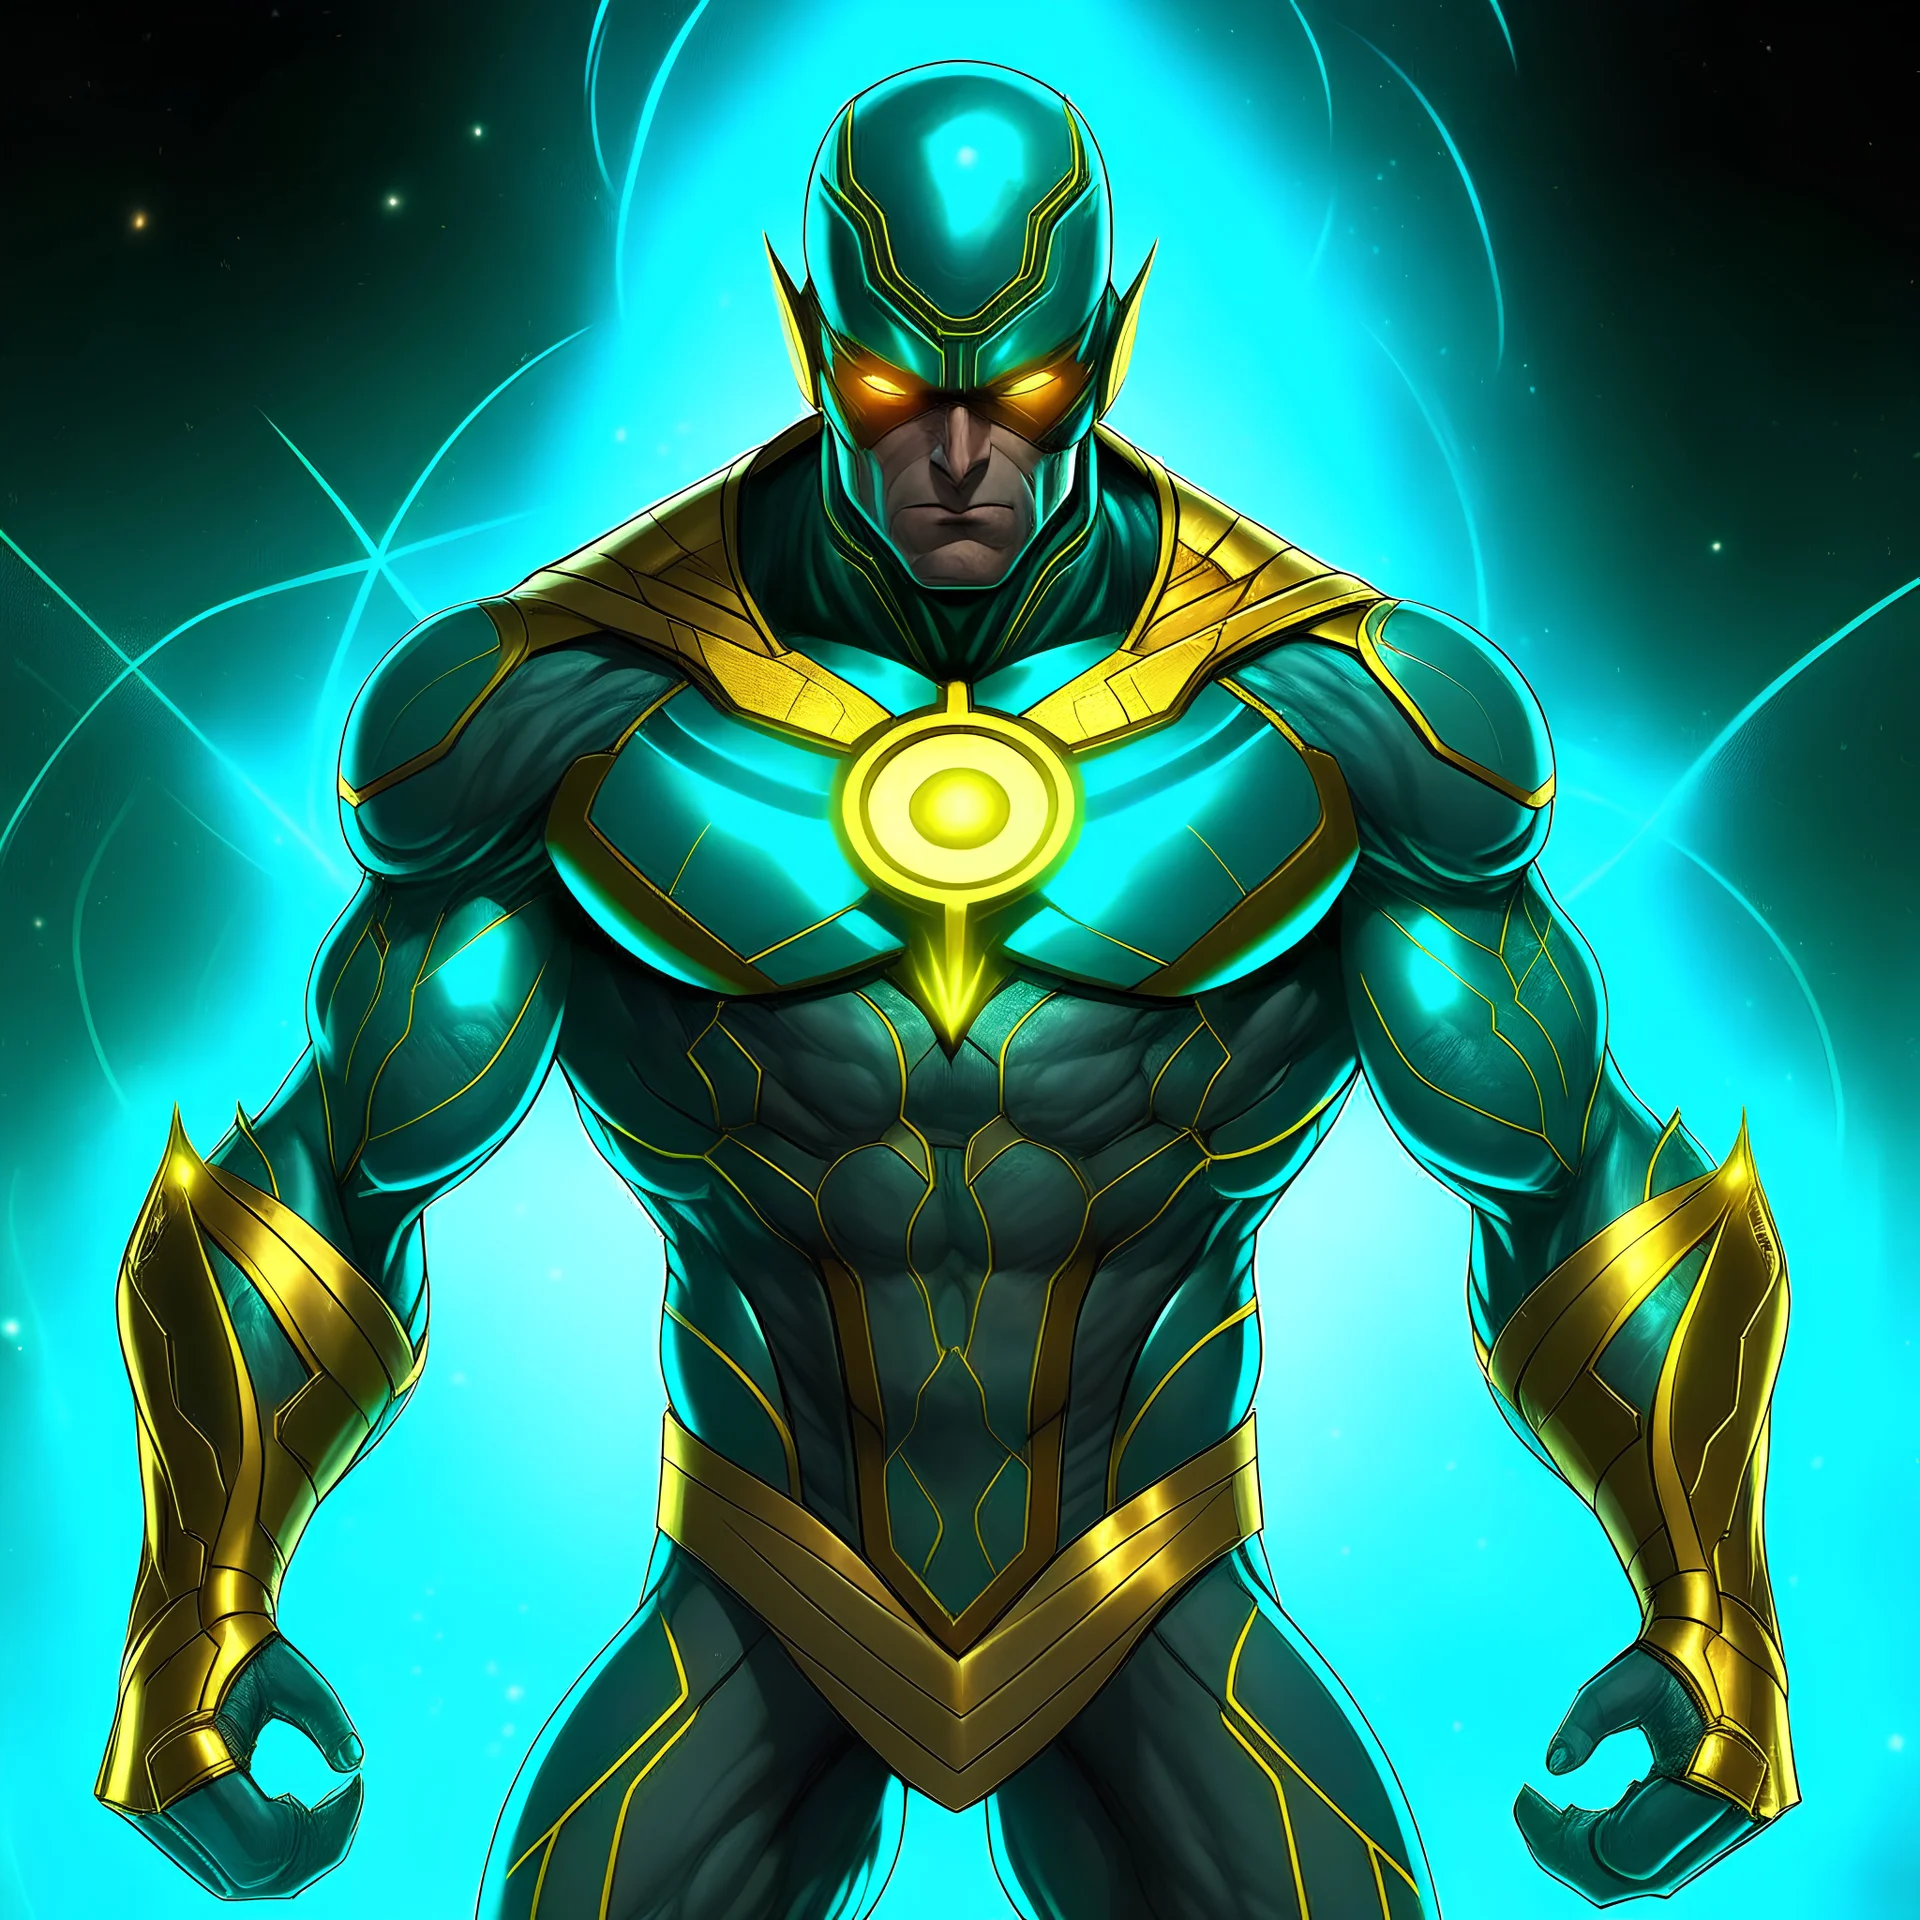 A superhero man with infinite power and technology from the galactic race